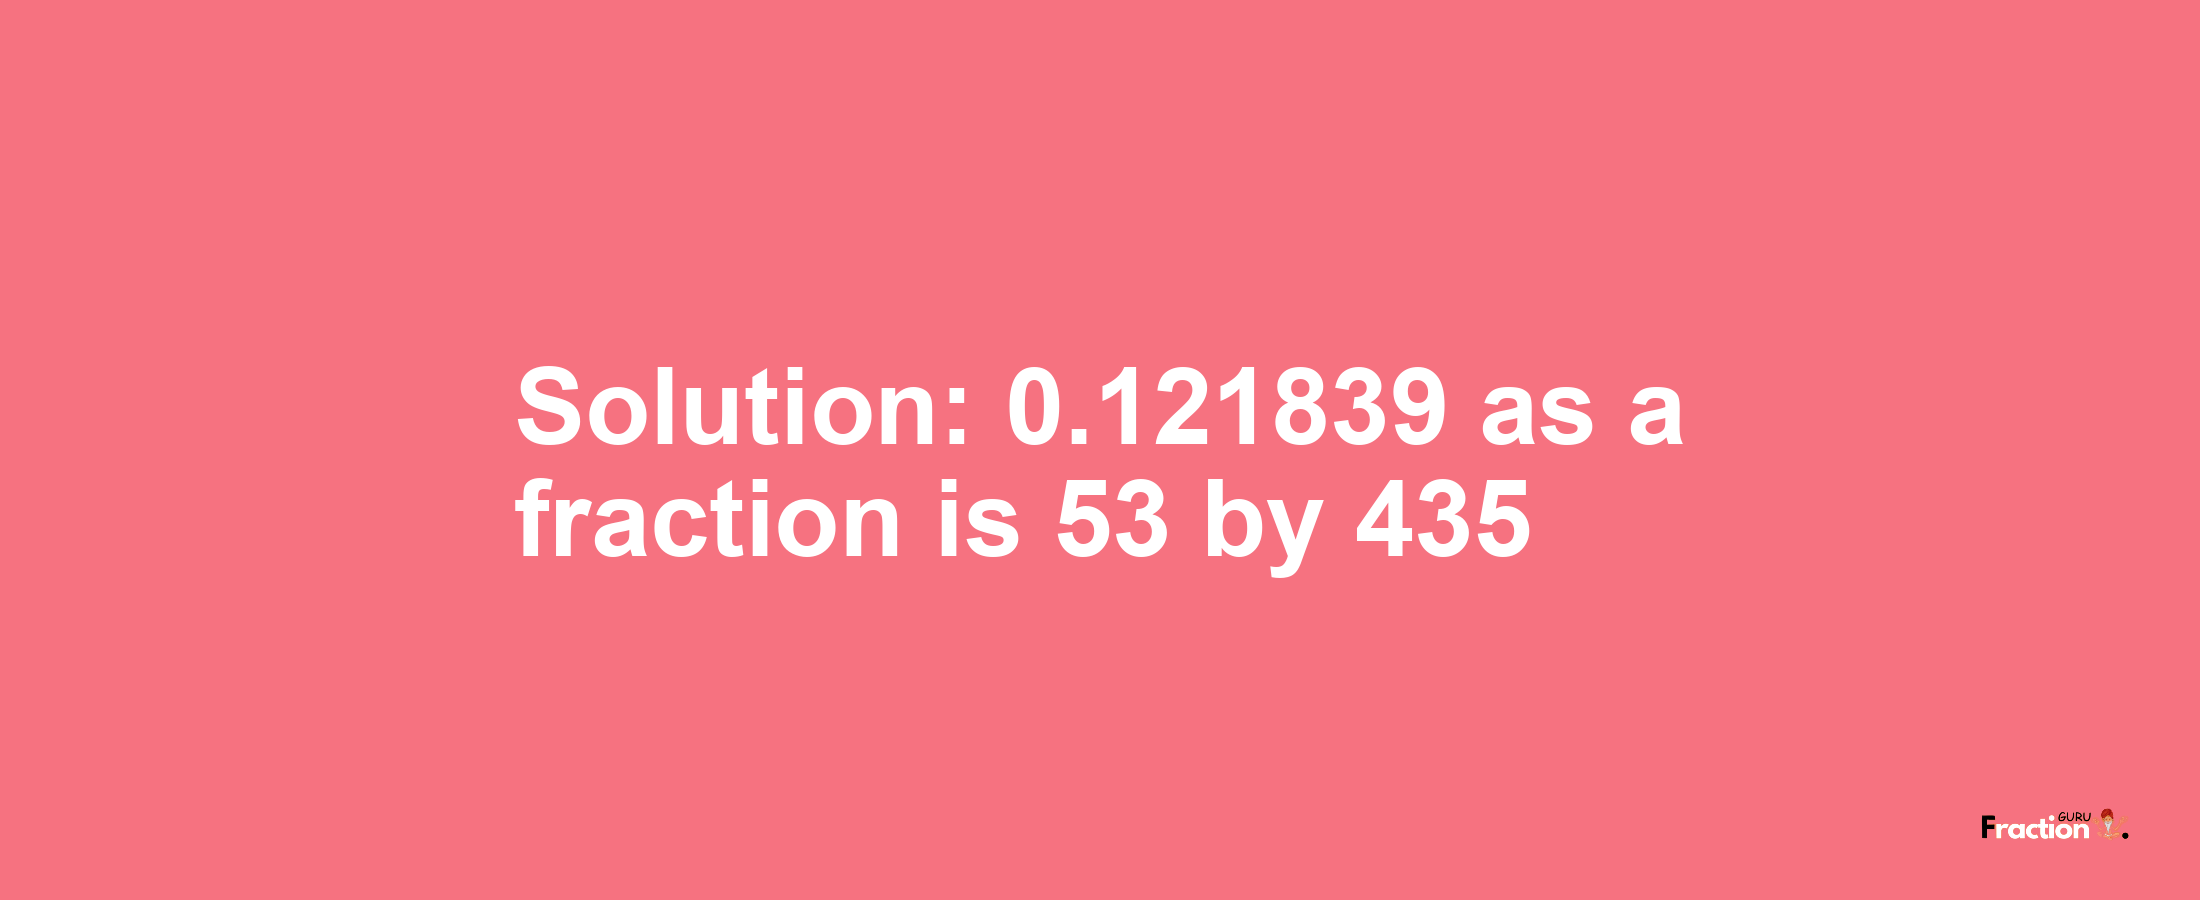 Solution:0.121839 as a fraction is 53/435